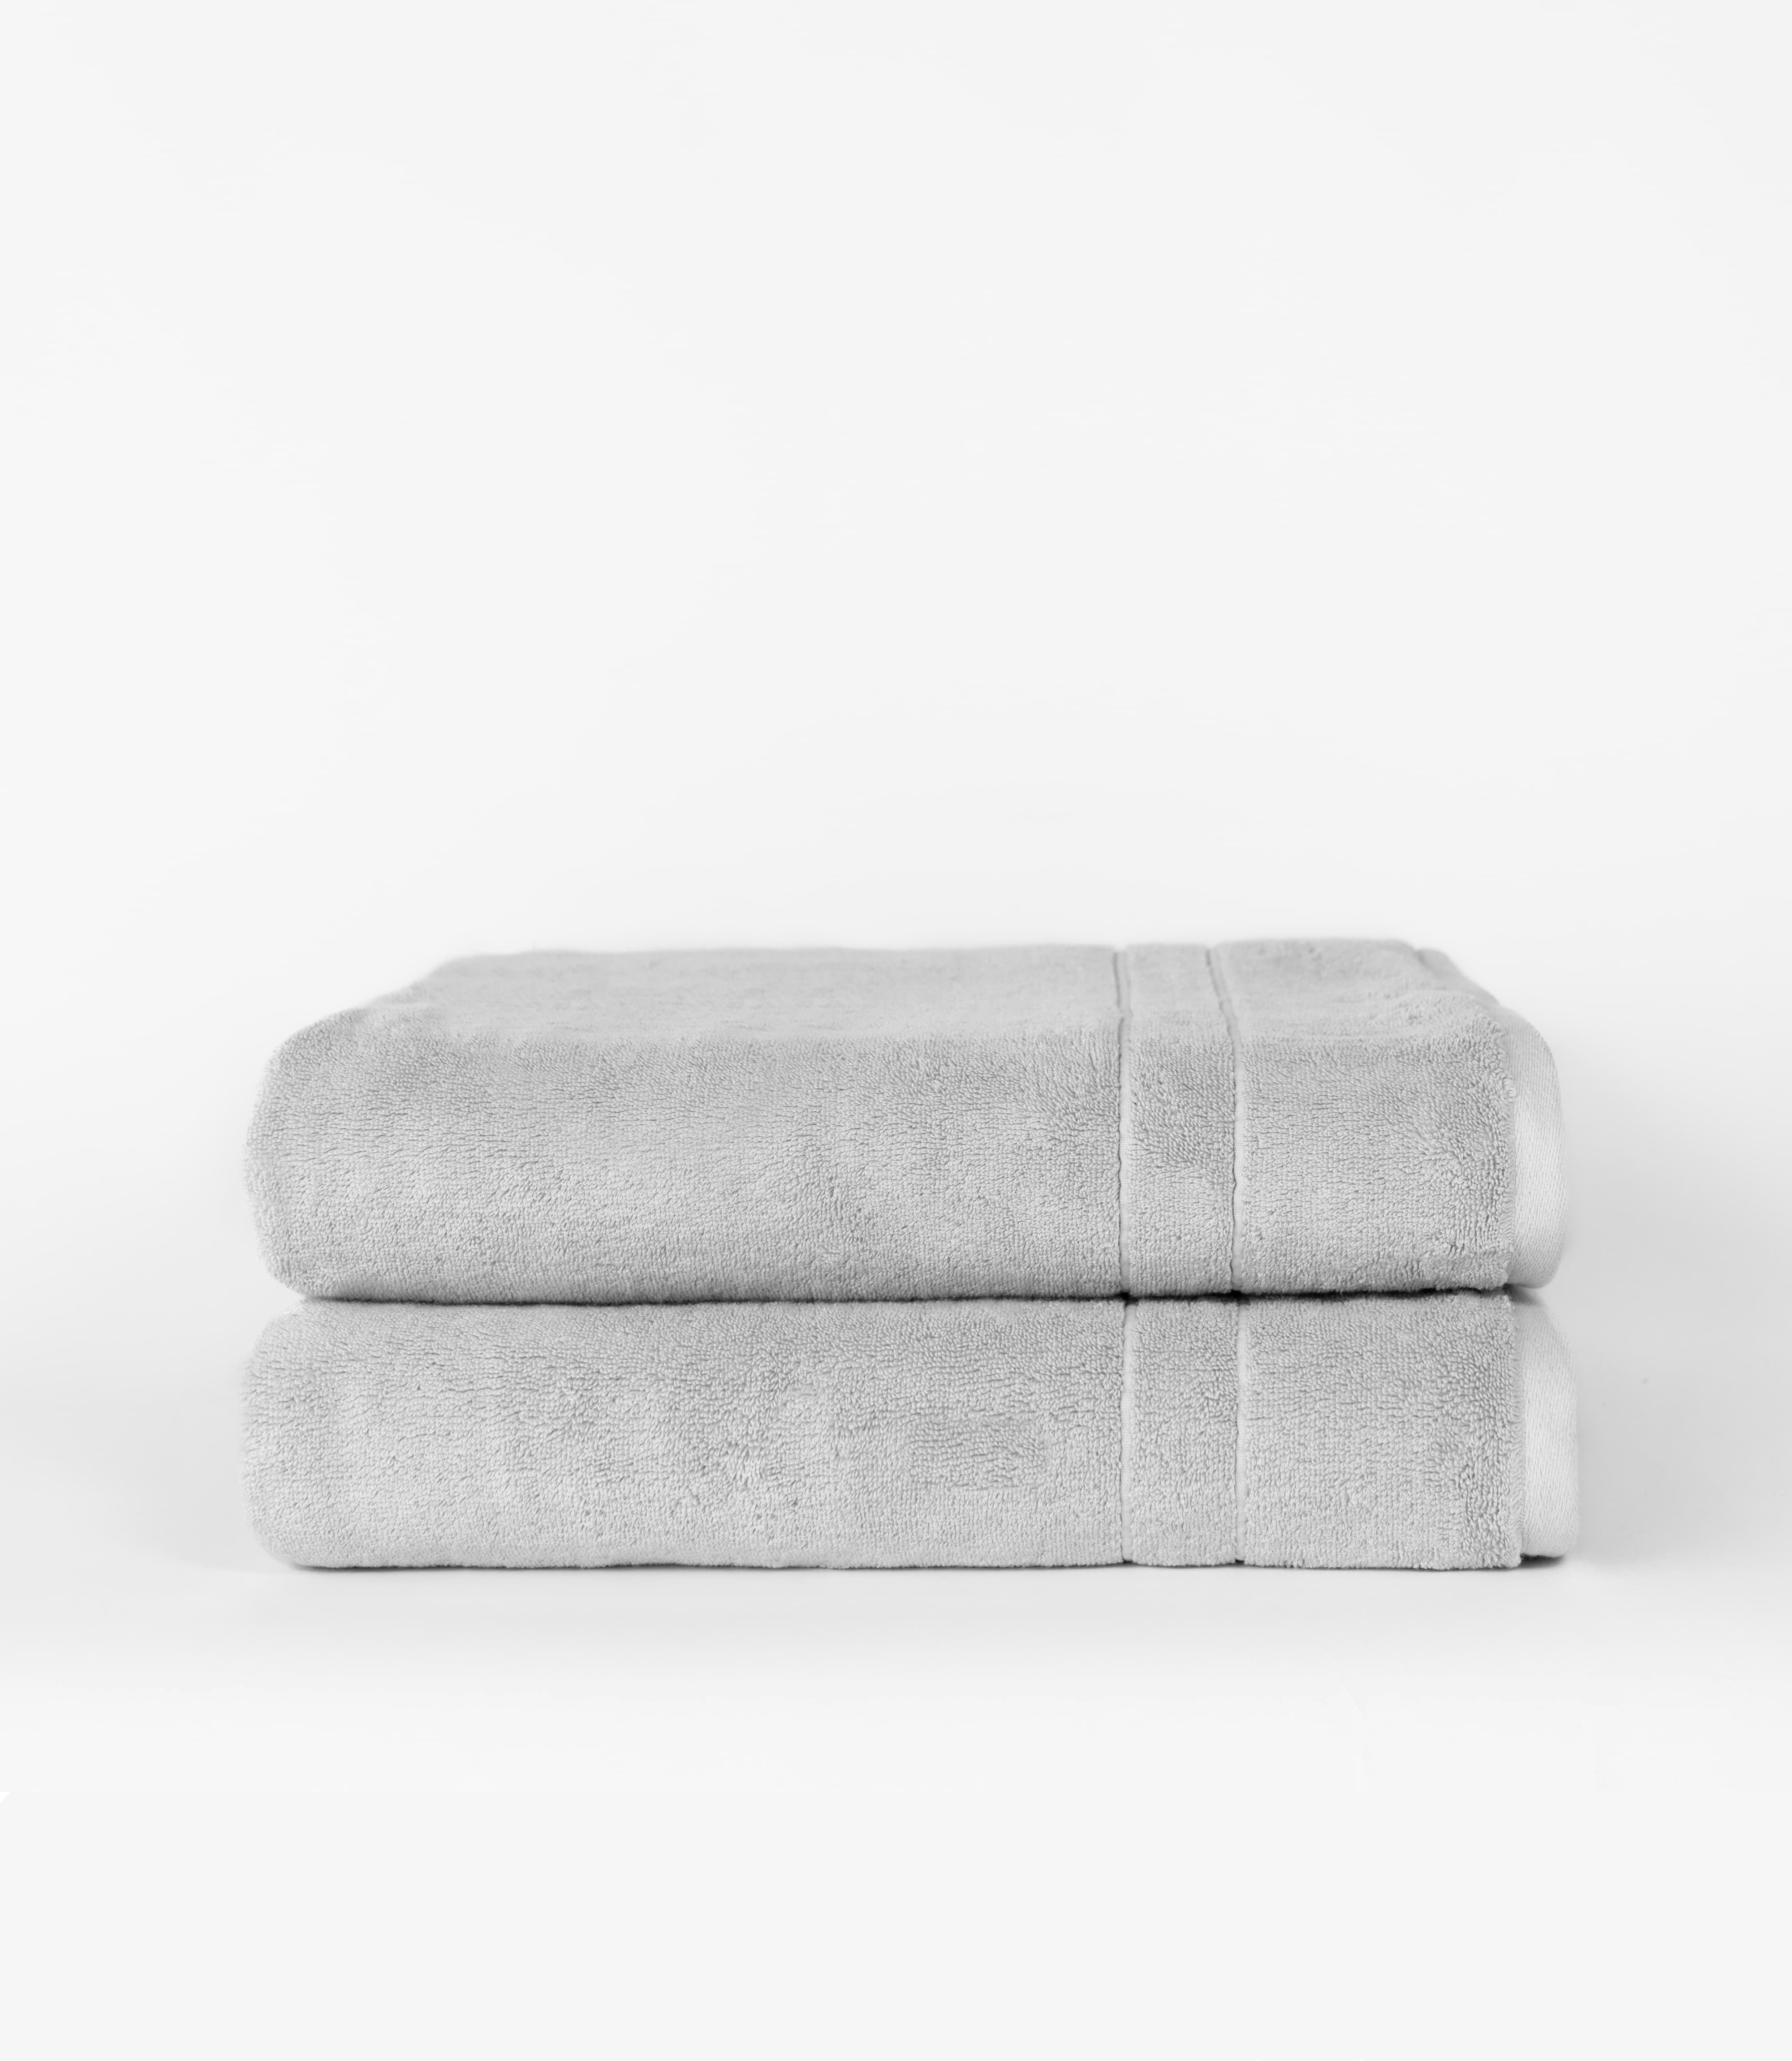 Premium Plush Bath Sheets in the color light grey. Photo of bath sheets taken with white background |Color:Light Grey